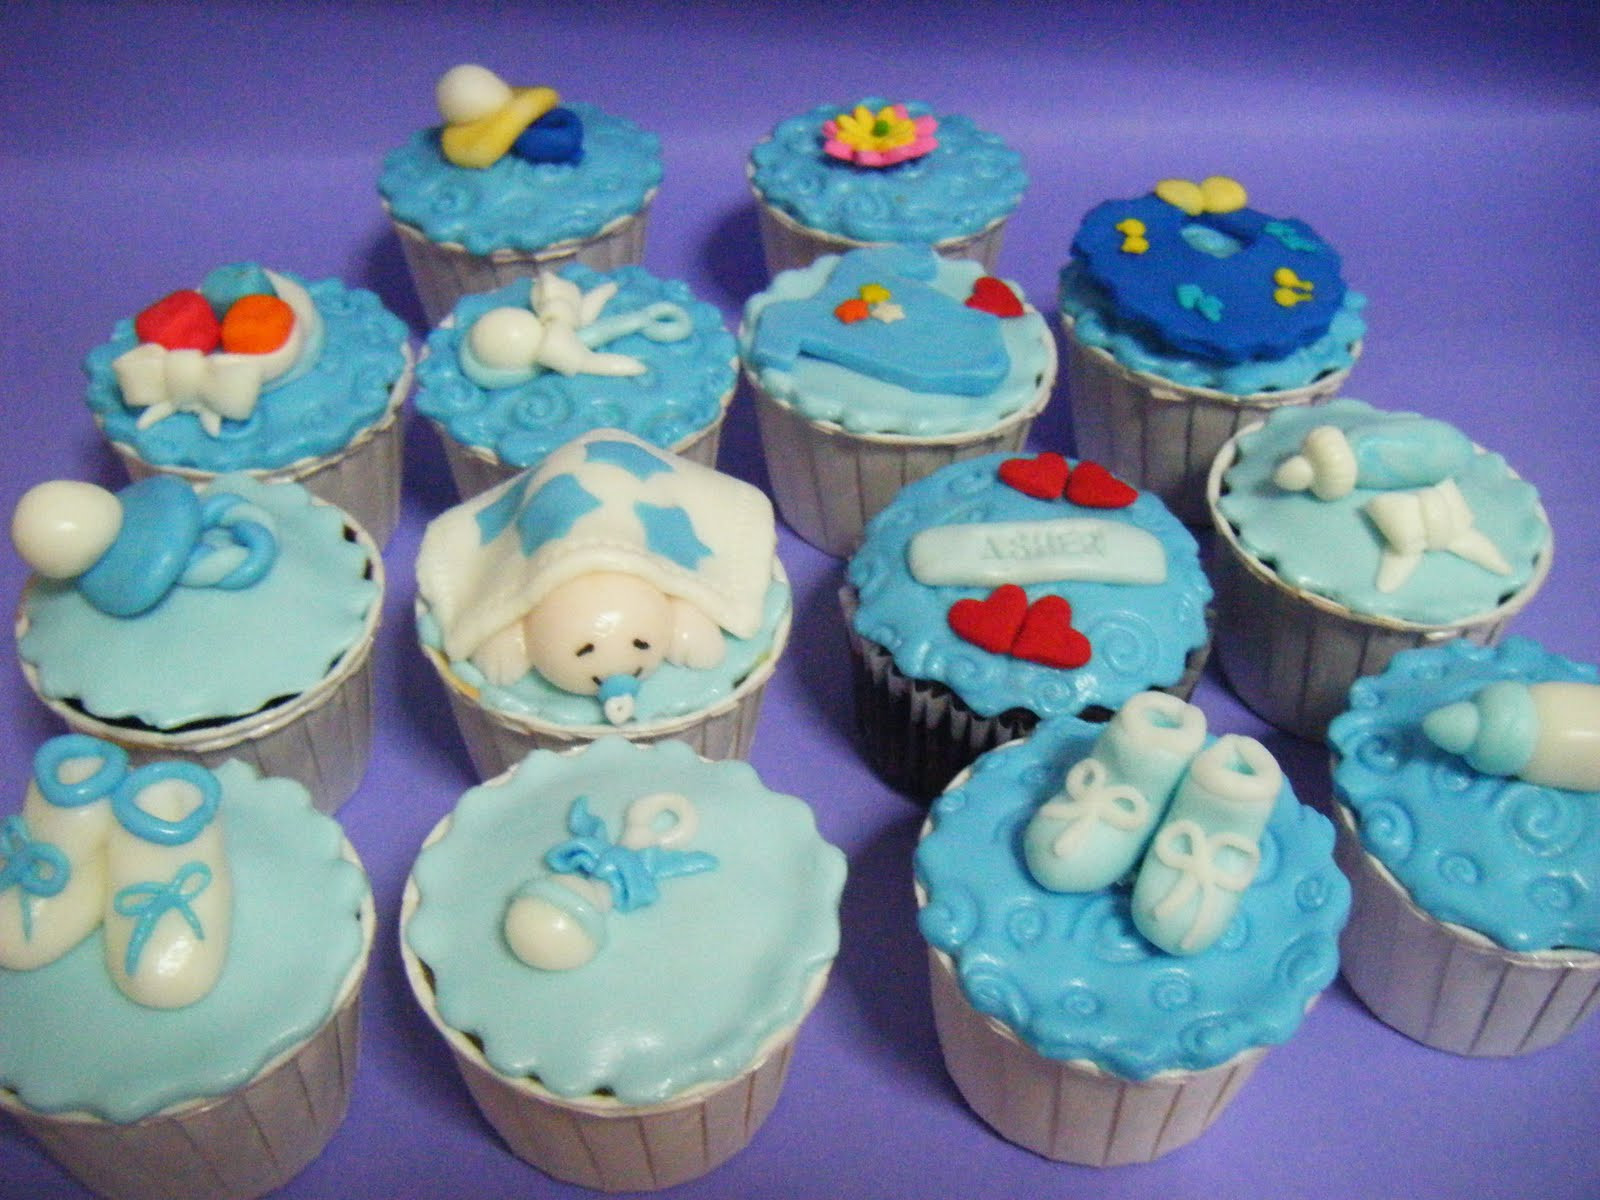 Baby Boy Cupcake Decorating Ideas
 Desserts An Important Part The Baby Shower Menu